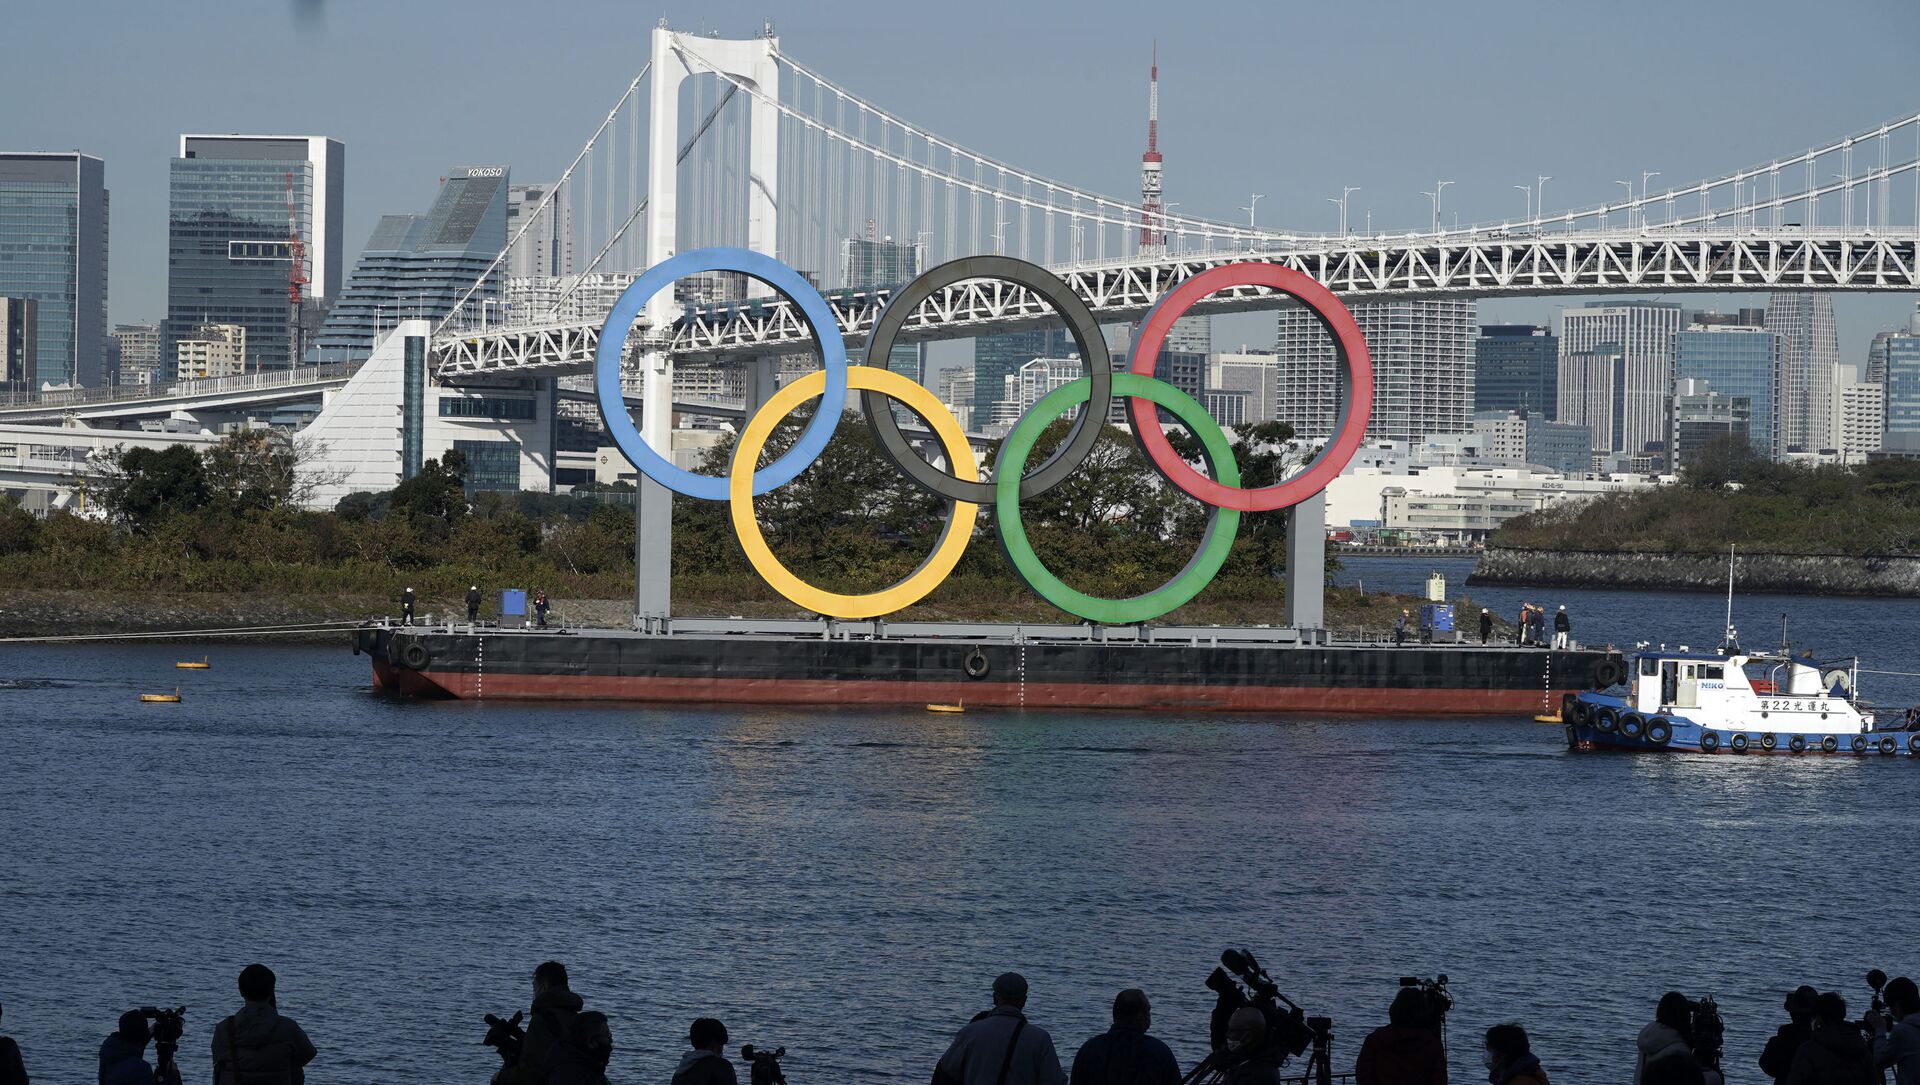 The Olympic Symbol is reinstated after it was taken down for maintenance ahead of the postponed Tokyo 2020 Olympics in the Odaiba section, Tokyo Bay, Tuesday, 1 December 2020. - Sputnik International, 1920, 11.03.2021